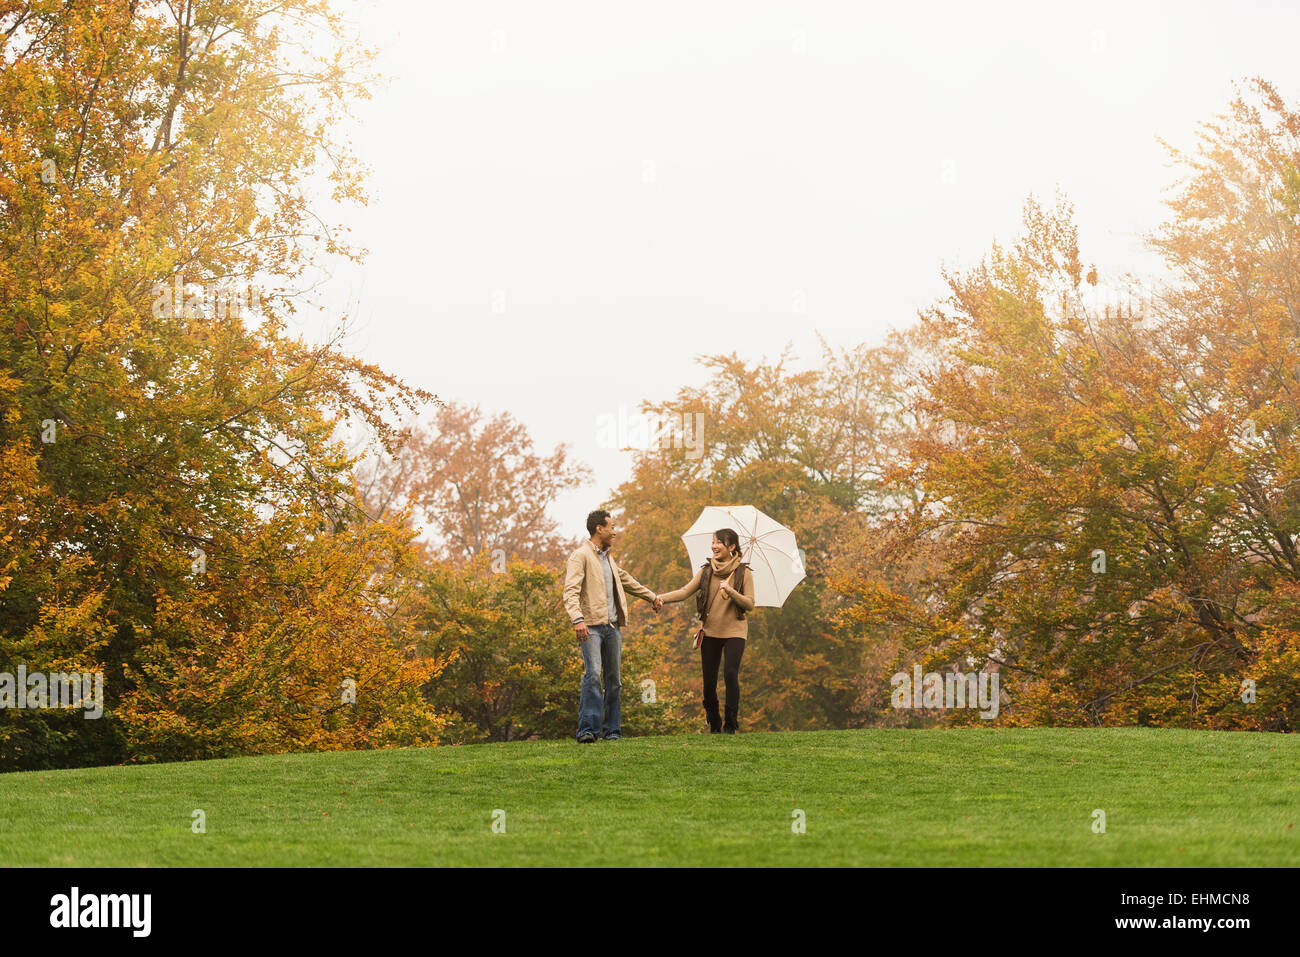 Couple walking with umbrella in park Banque D'Images